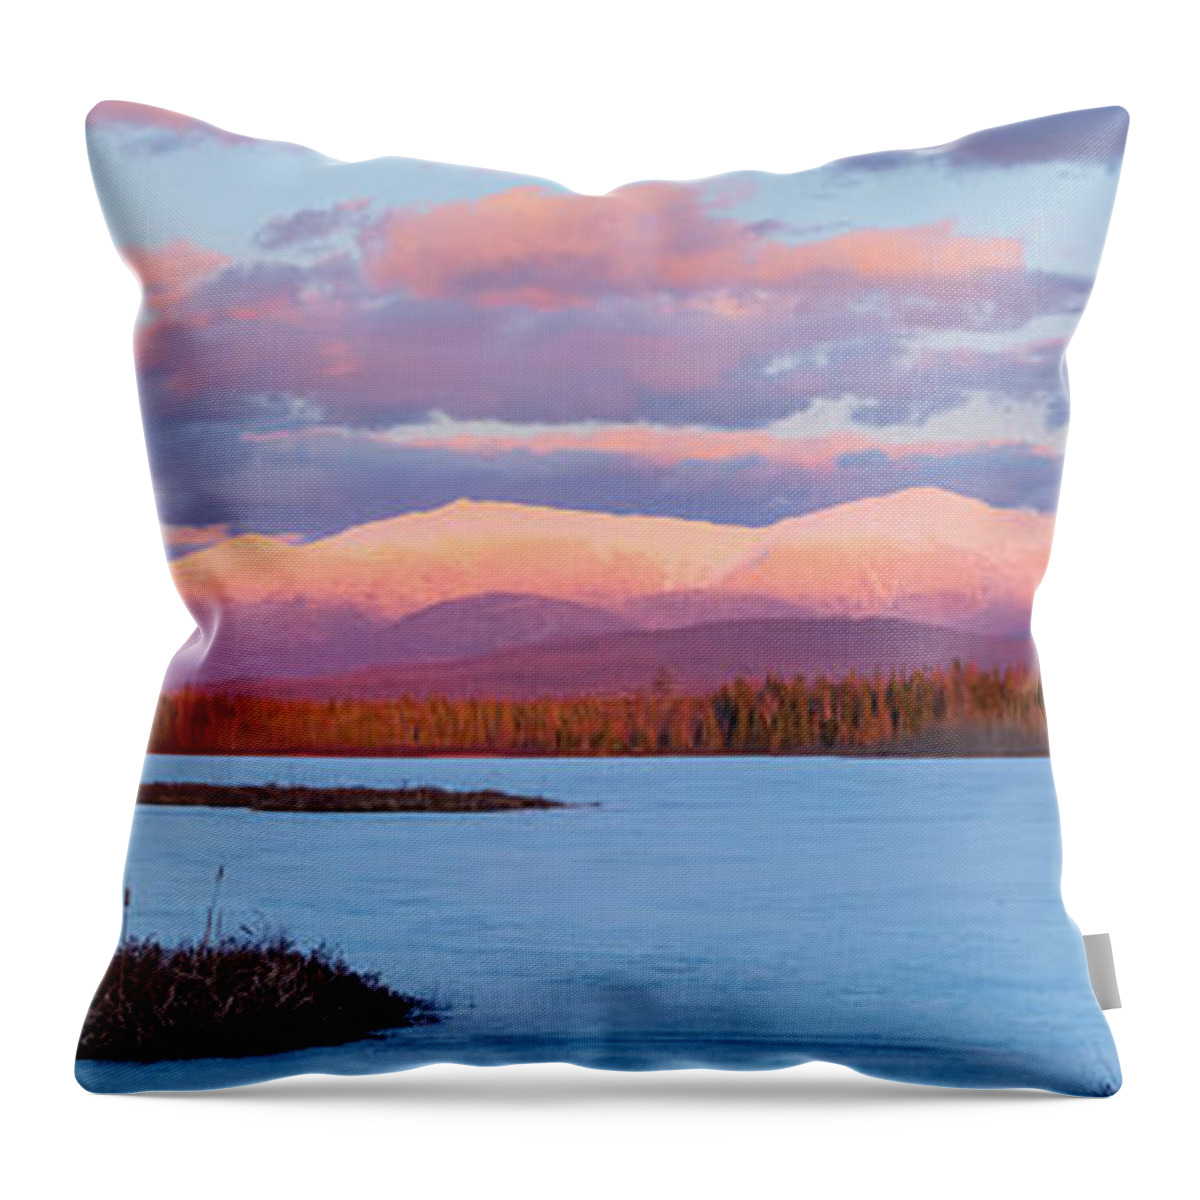 New Hampshire Throw Pillow featuring the photograph Mountain Views Over Cherry Pond by Jeff Sinon